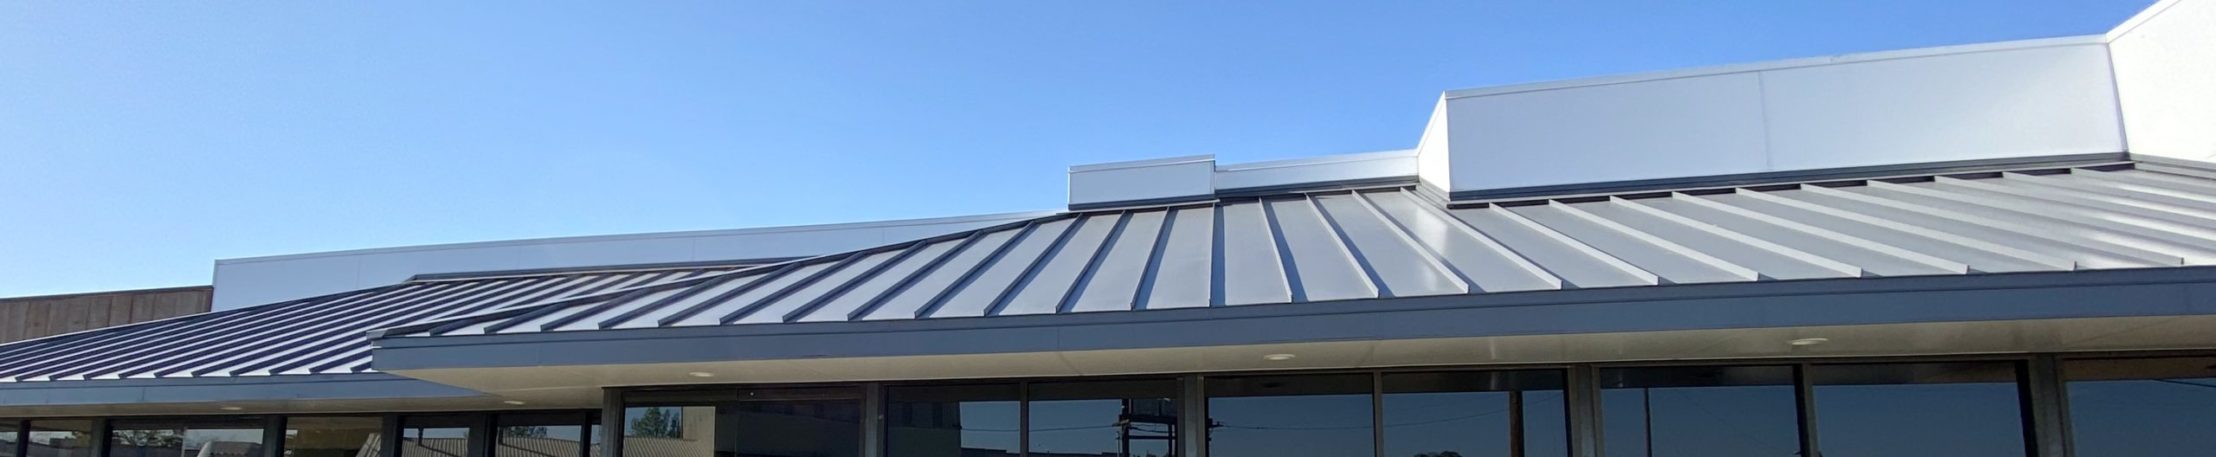 Sylvester Roofing Office Metal Roof